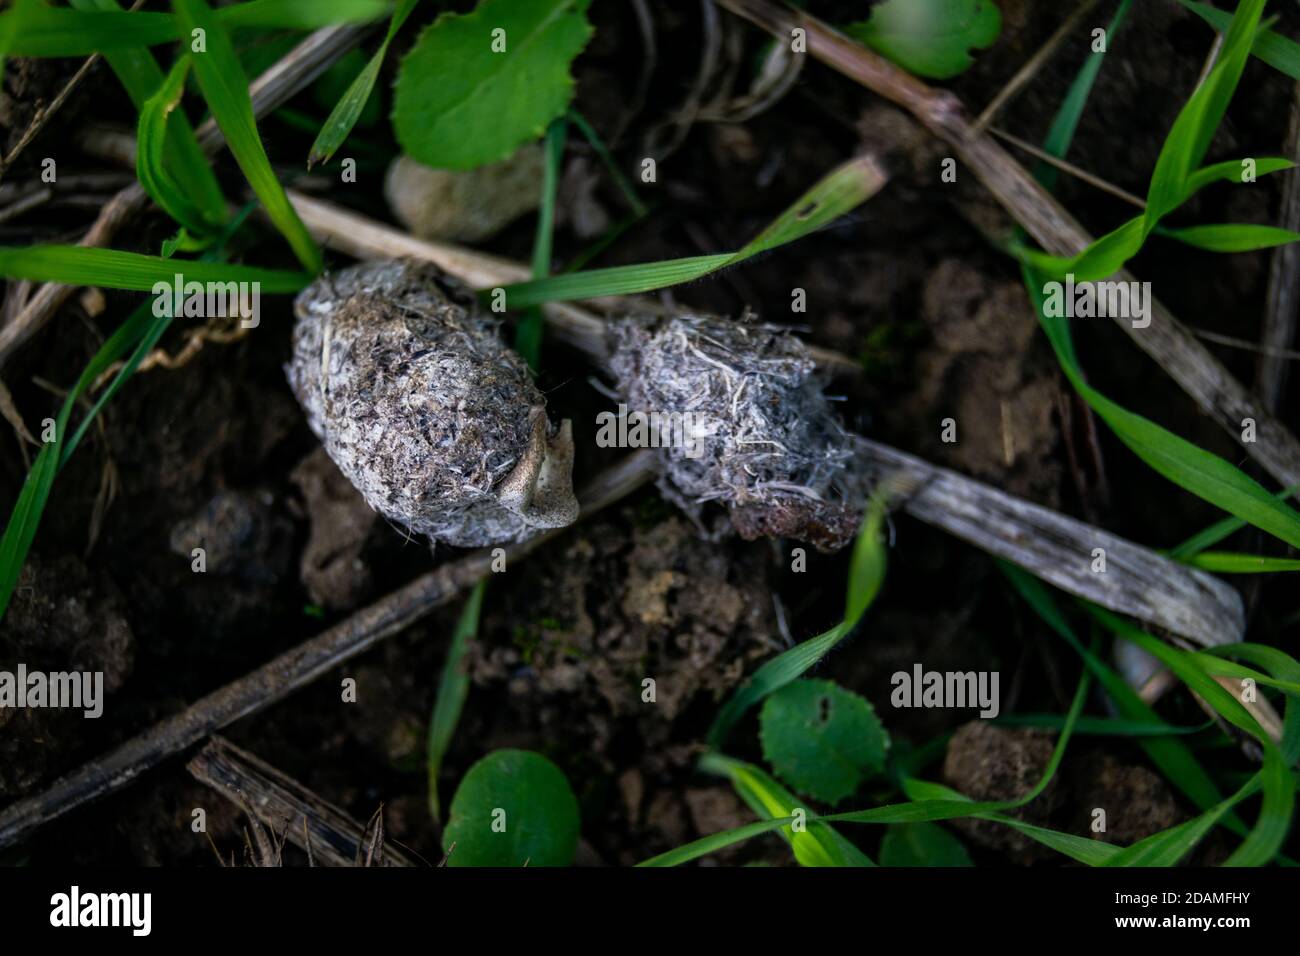 Owl pellet laying on the field, bird of prey pellets with fur and bones sticking out, indigested parts of animals eaten by olws, owl spit, vomit Stock Photo